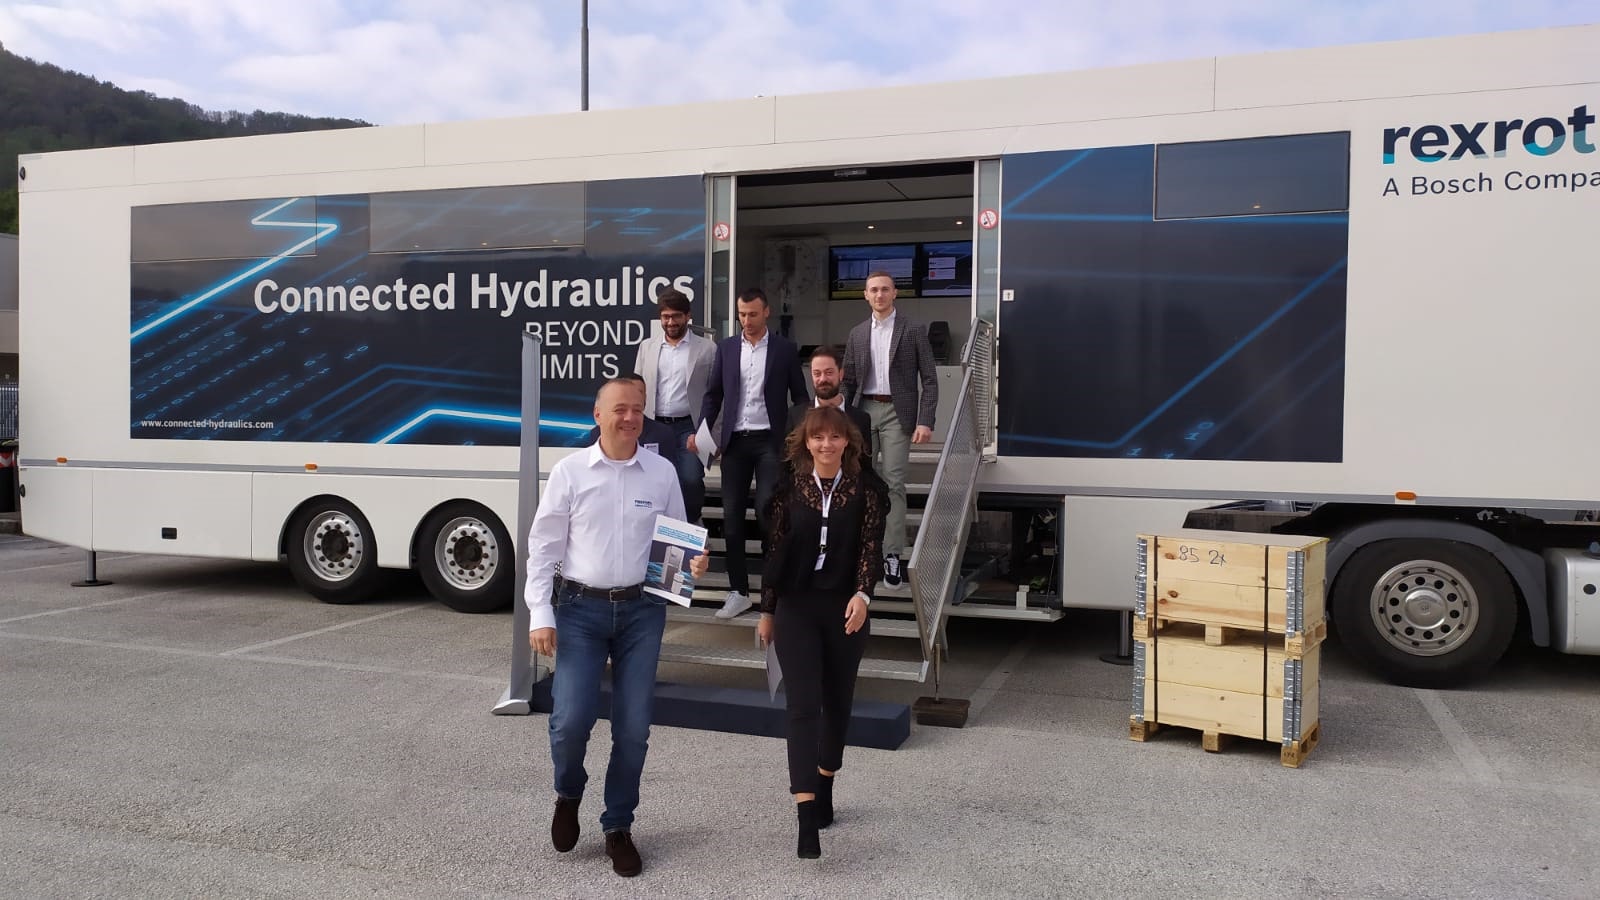 To discover new solutions for connected hydraulics